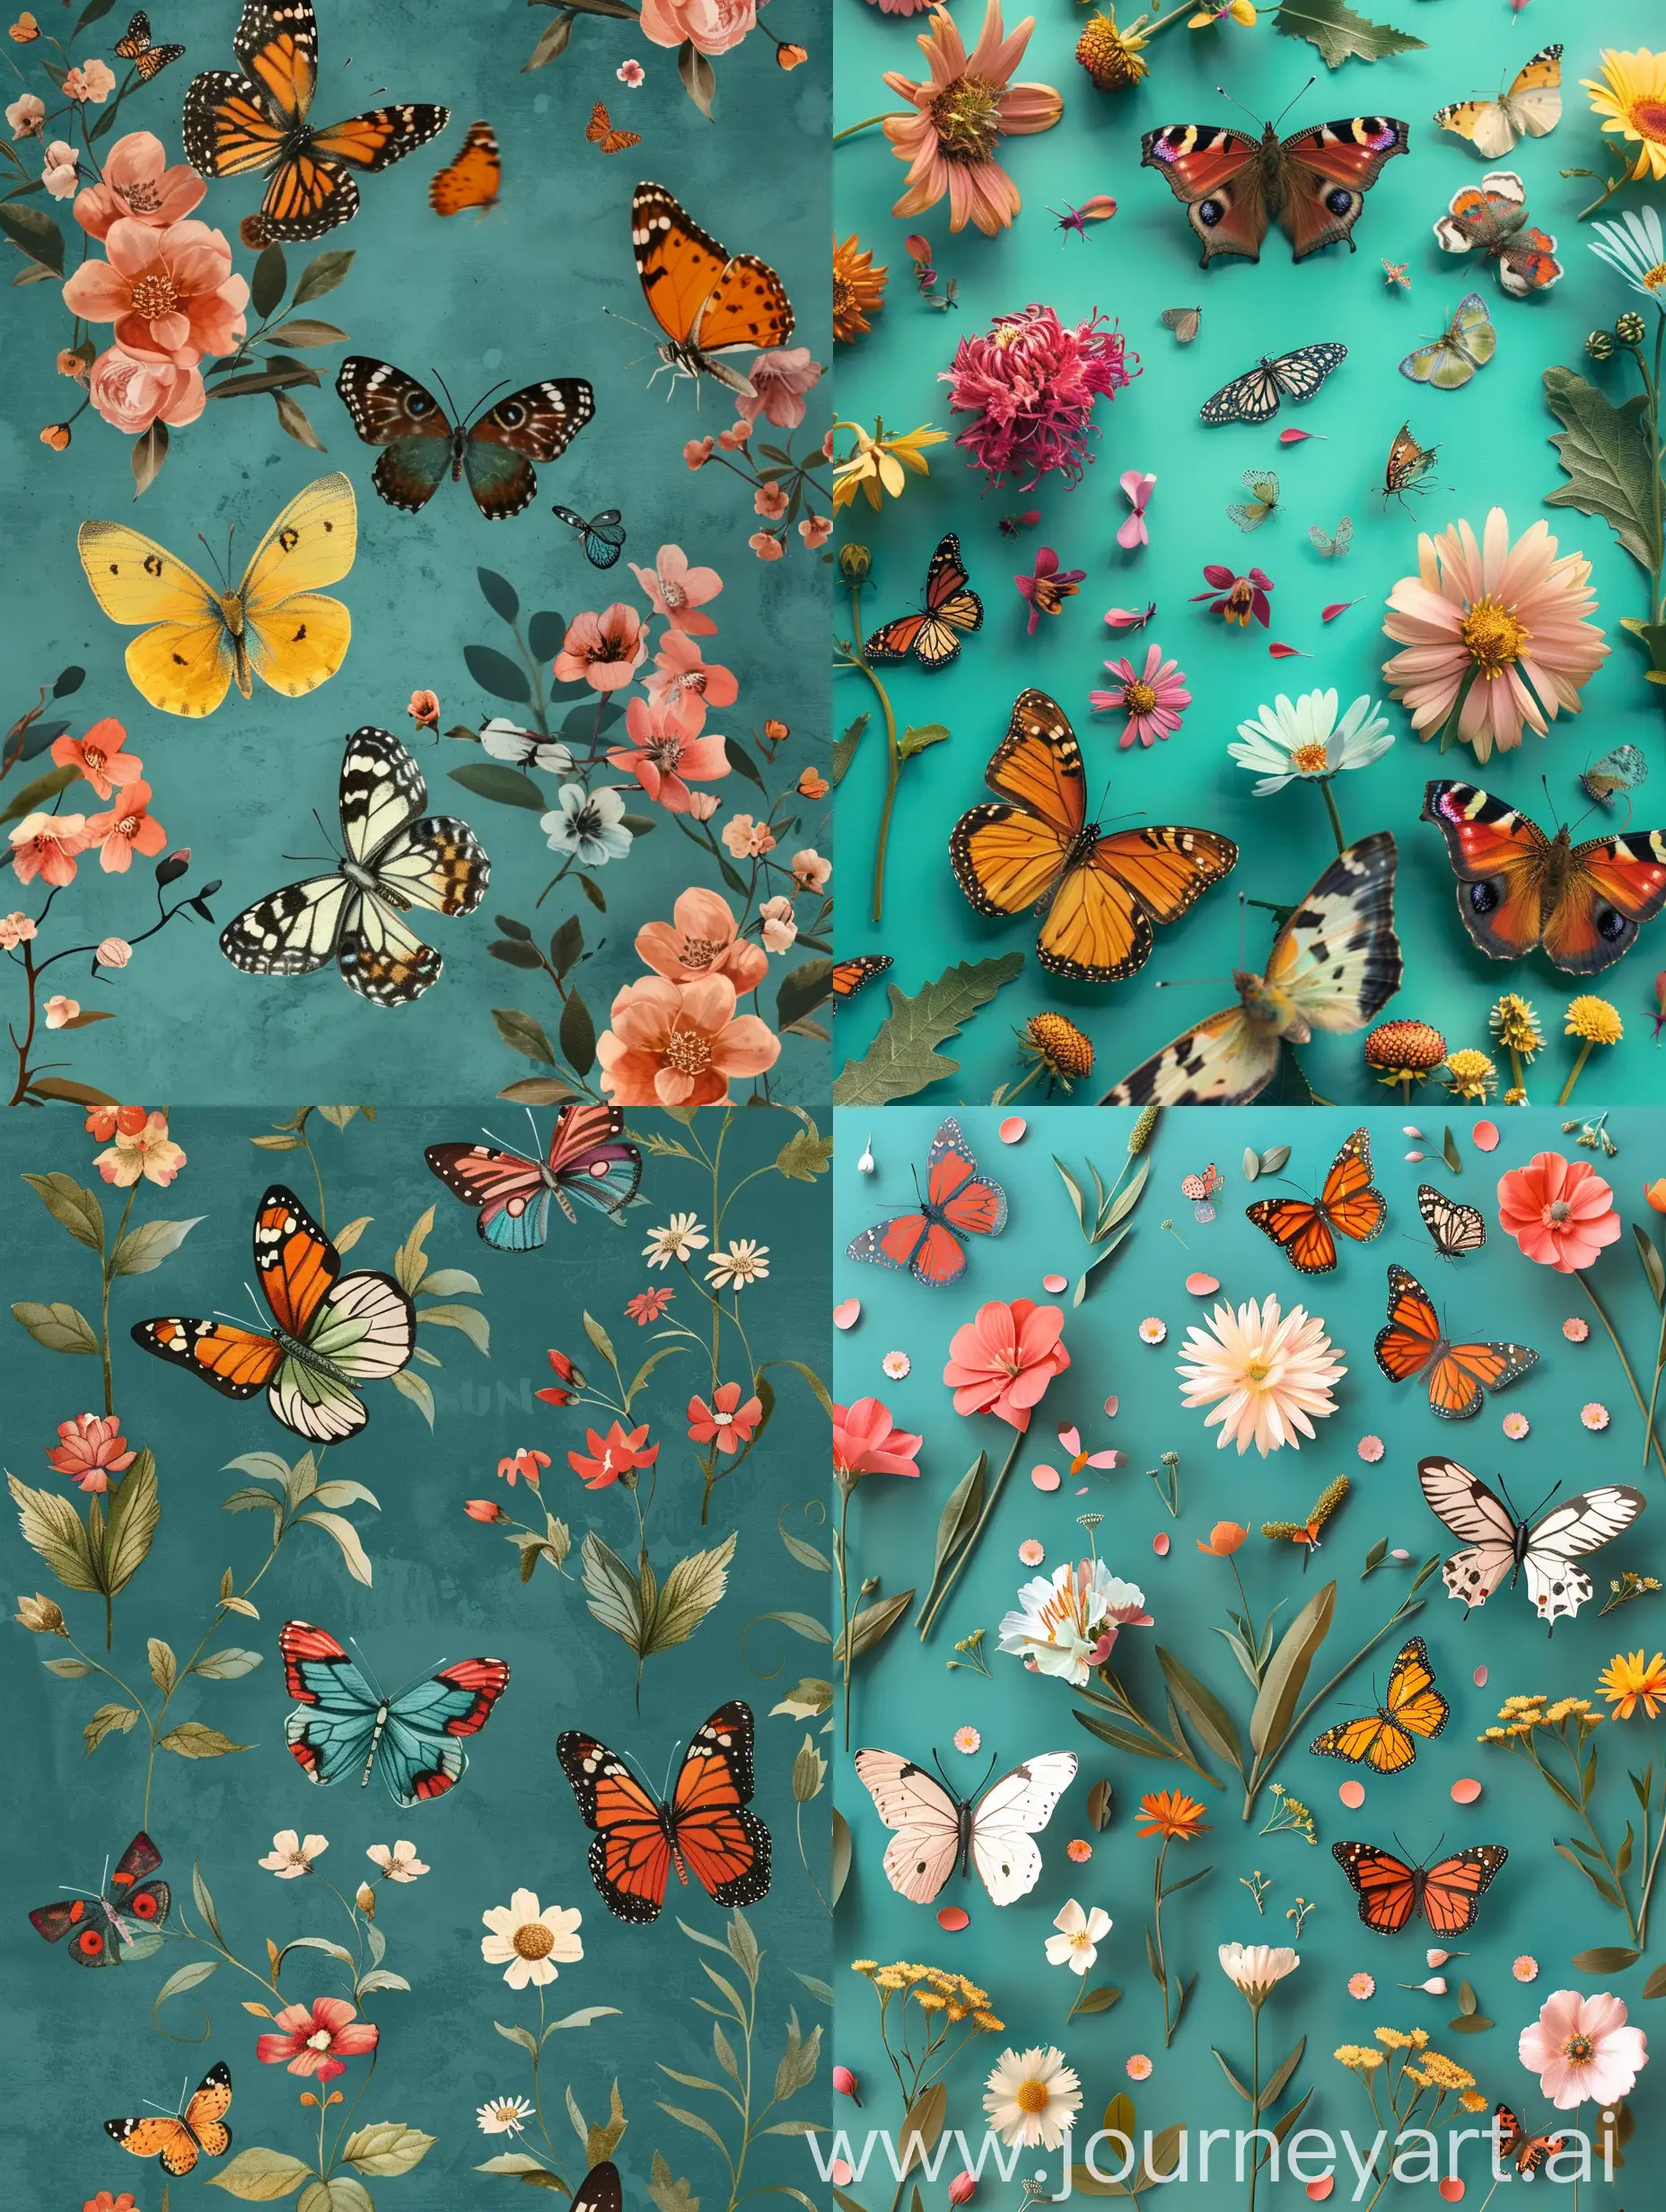 Colourful butterflies and flowers on a teal background